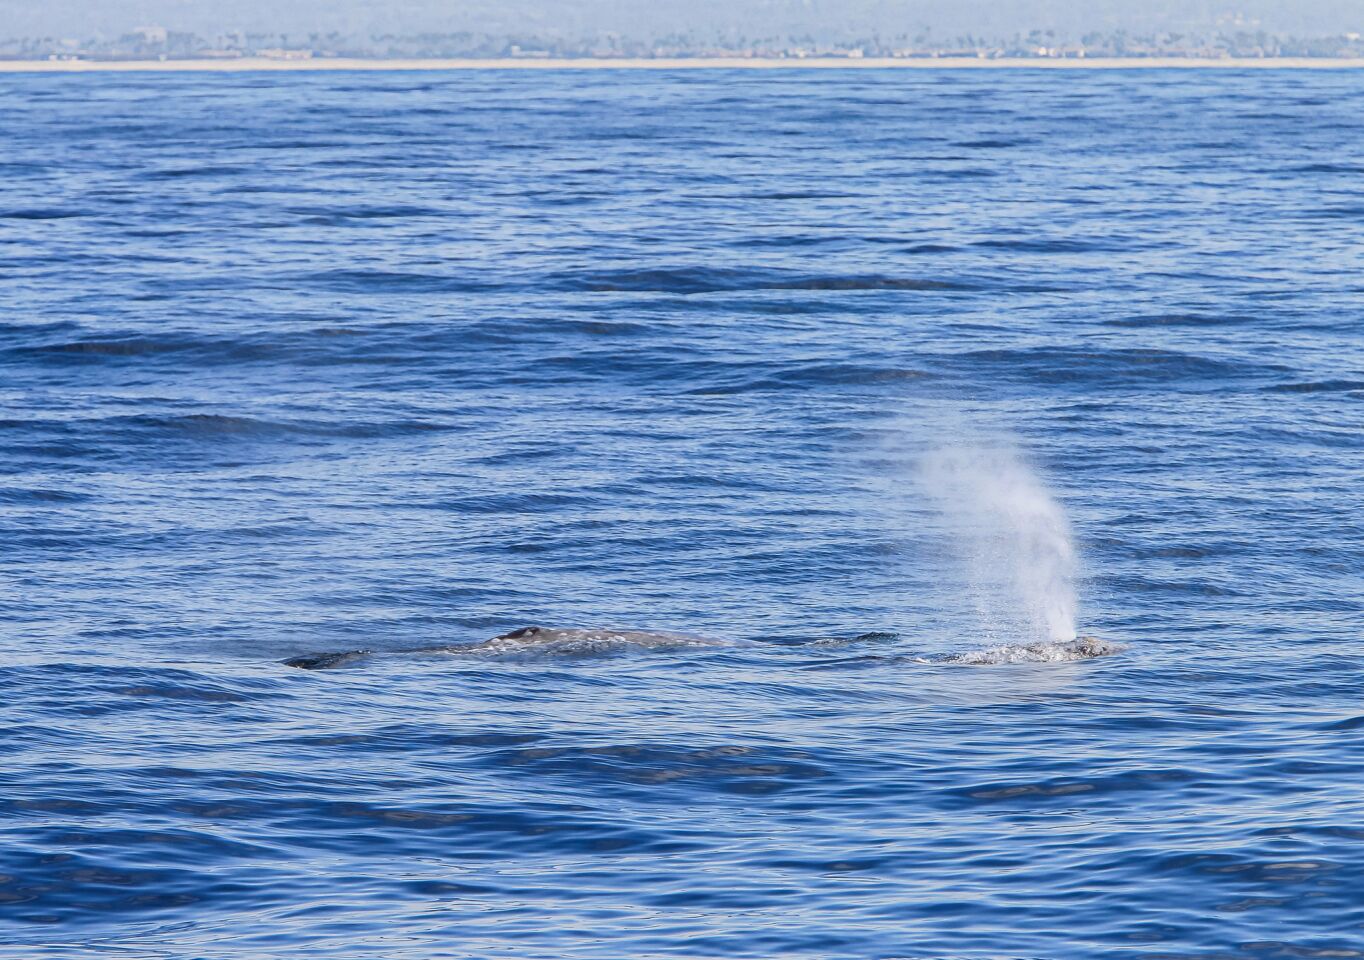 Two Eastern Pacific gray whales.